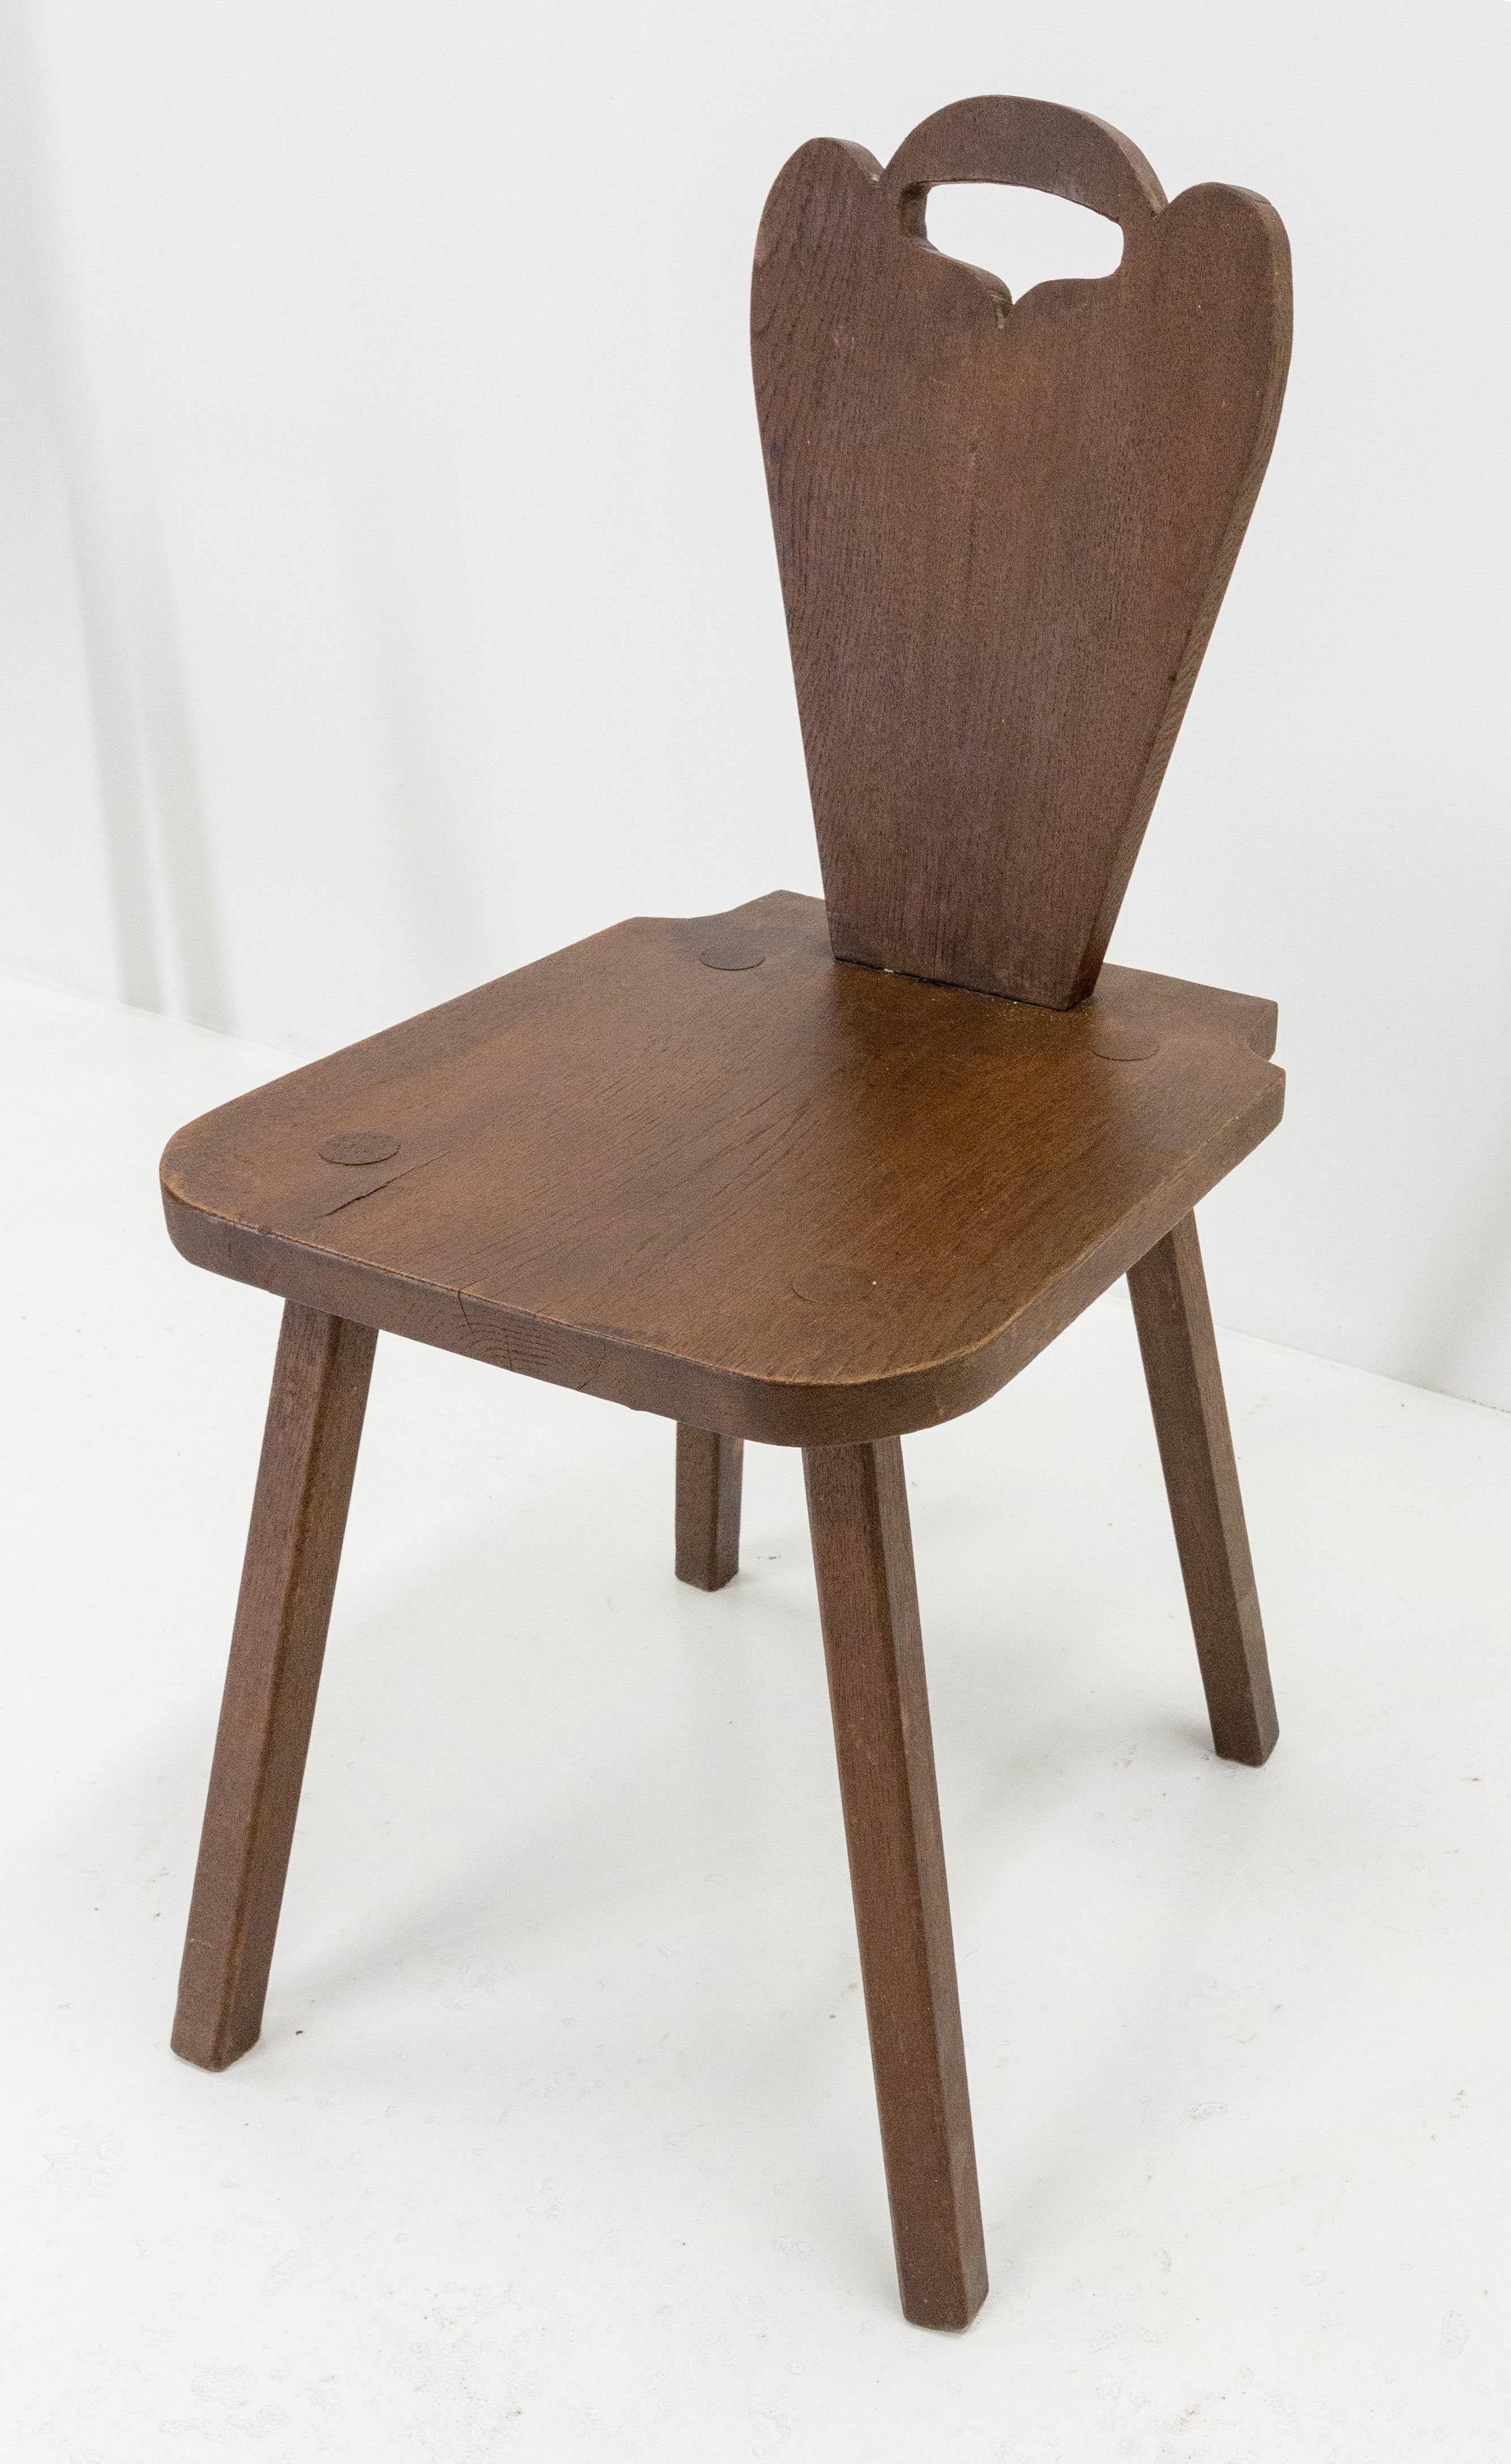 Six Dining Chairs Swiss Alp Escabelles Oak Brutalist Style, French 1950 1